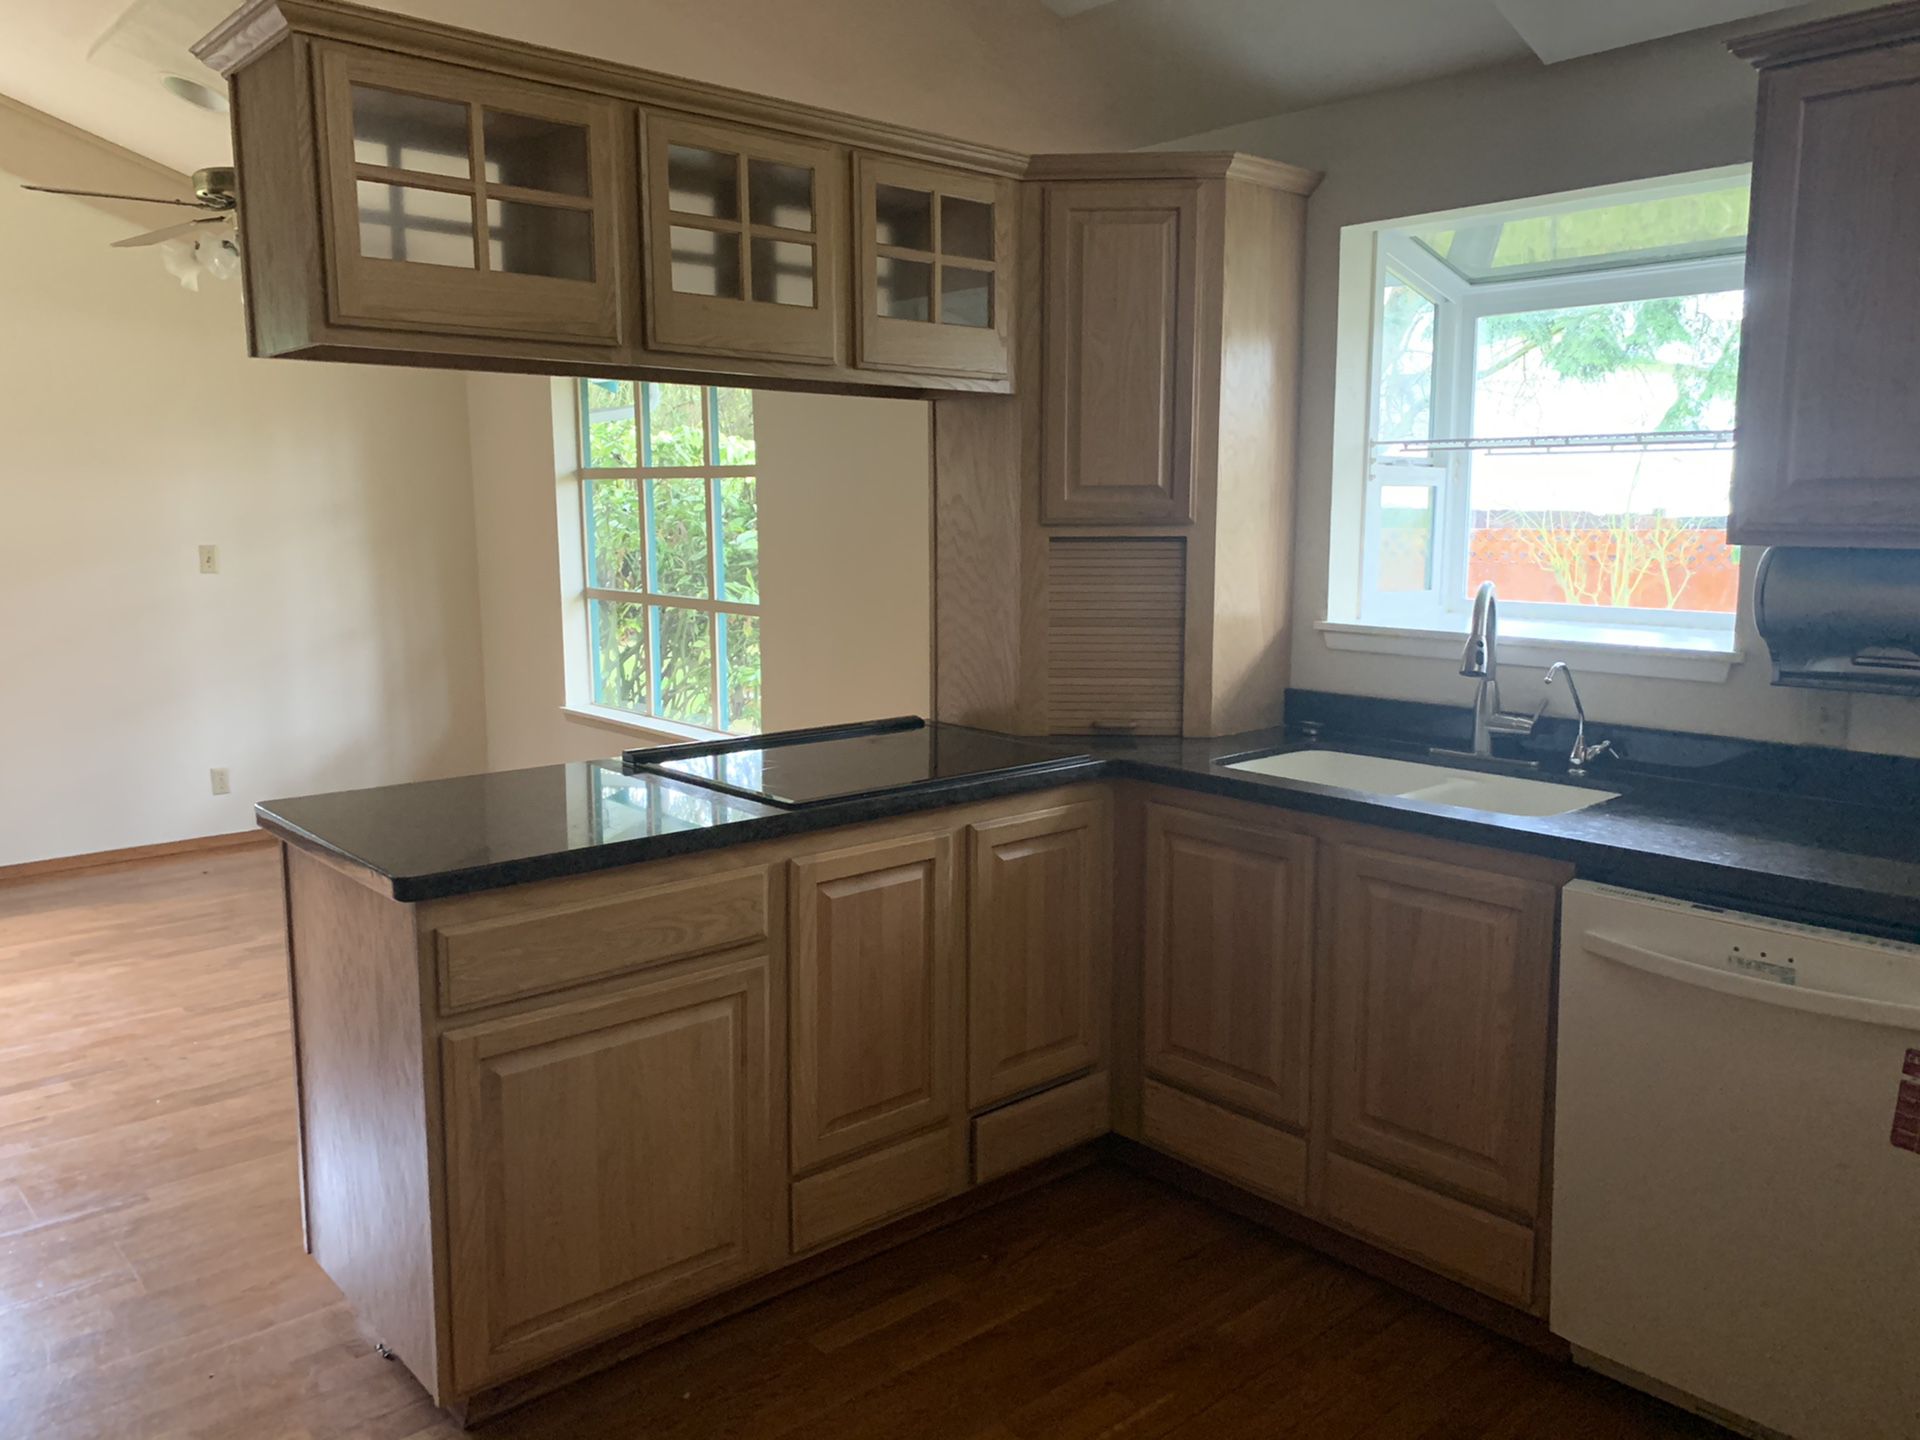 Cabinets with appliances